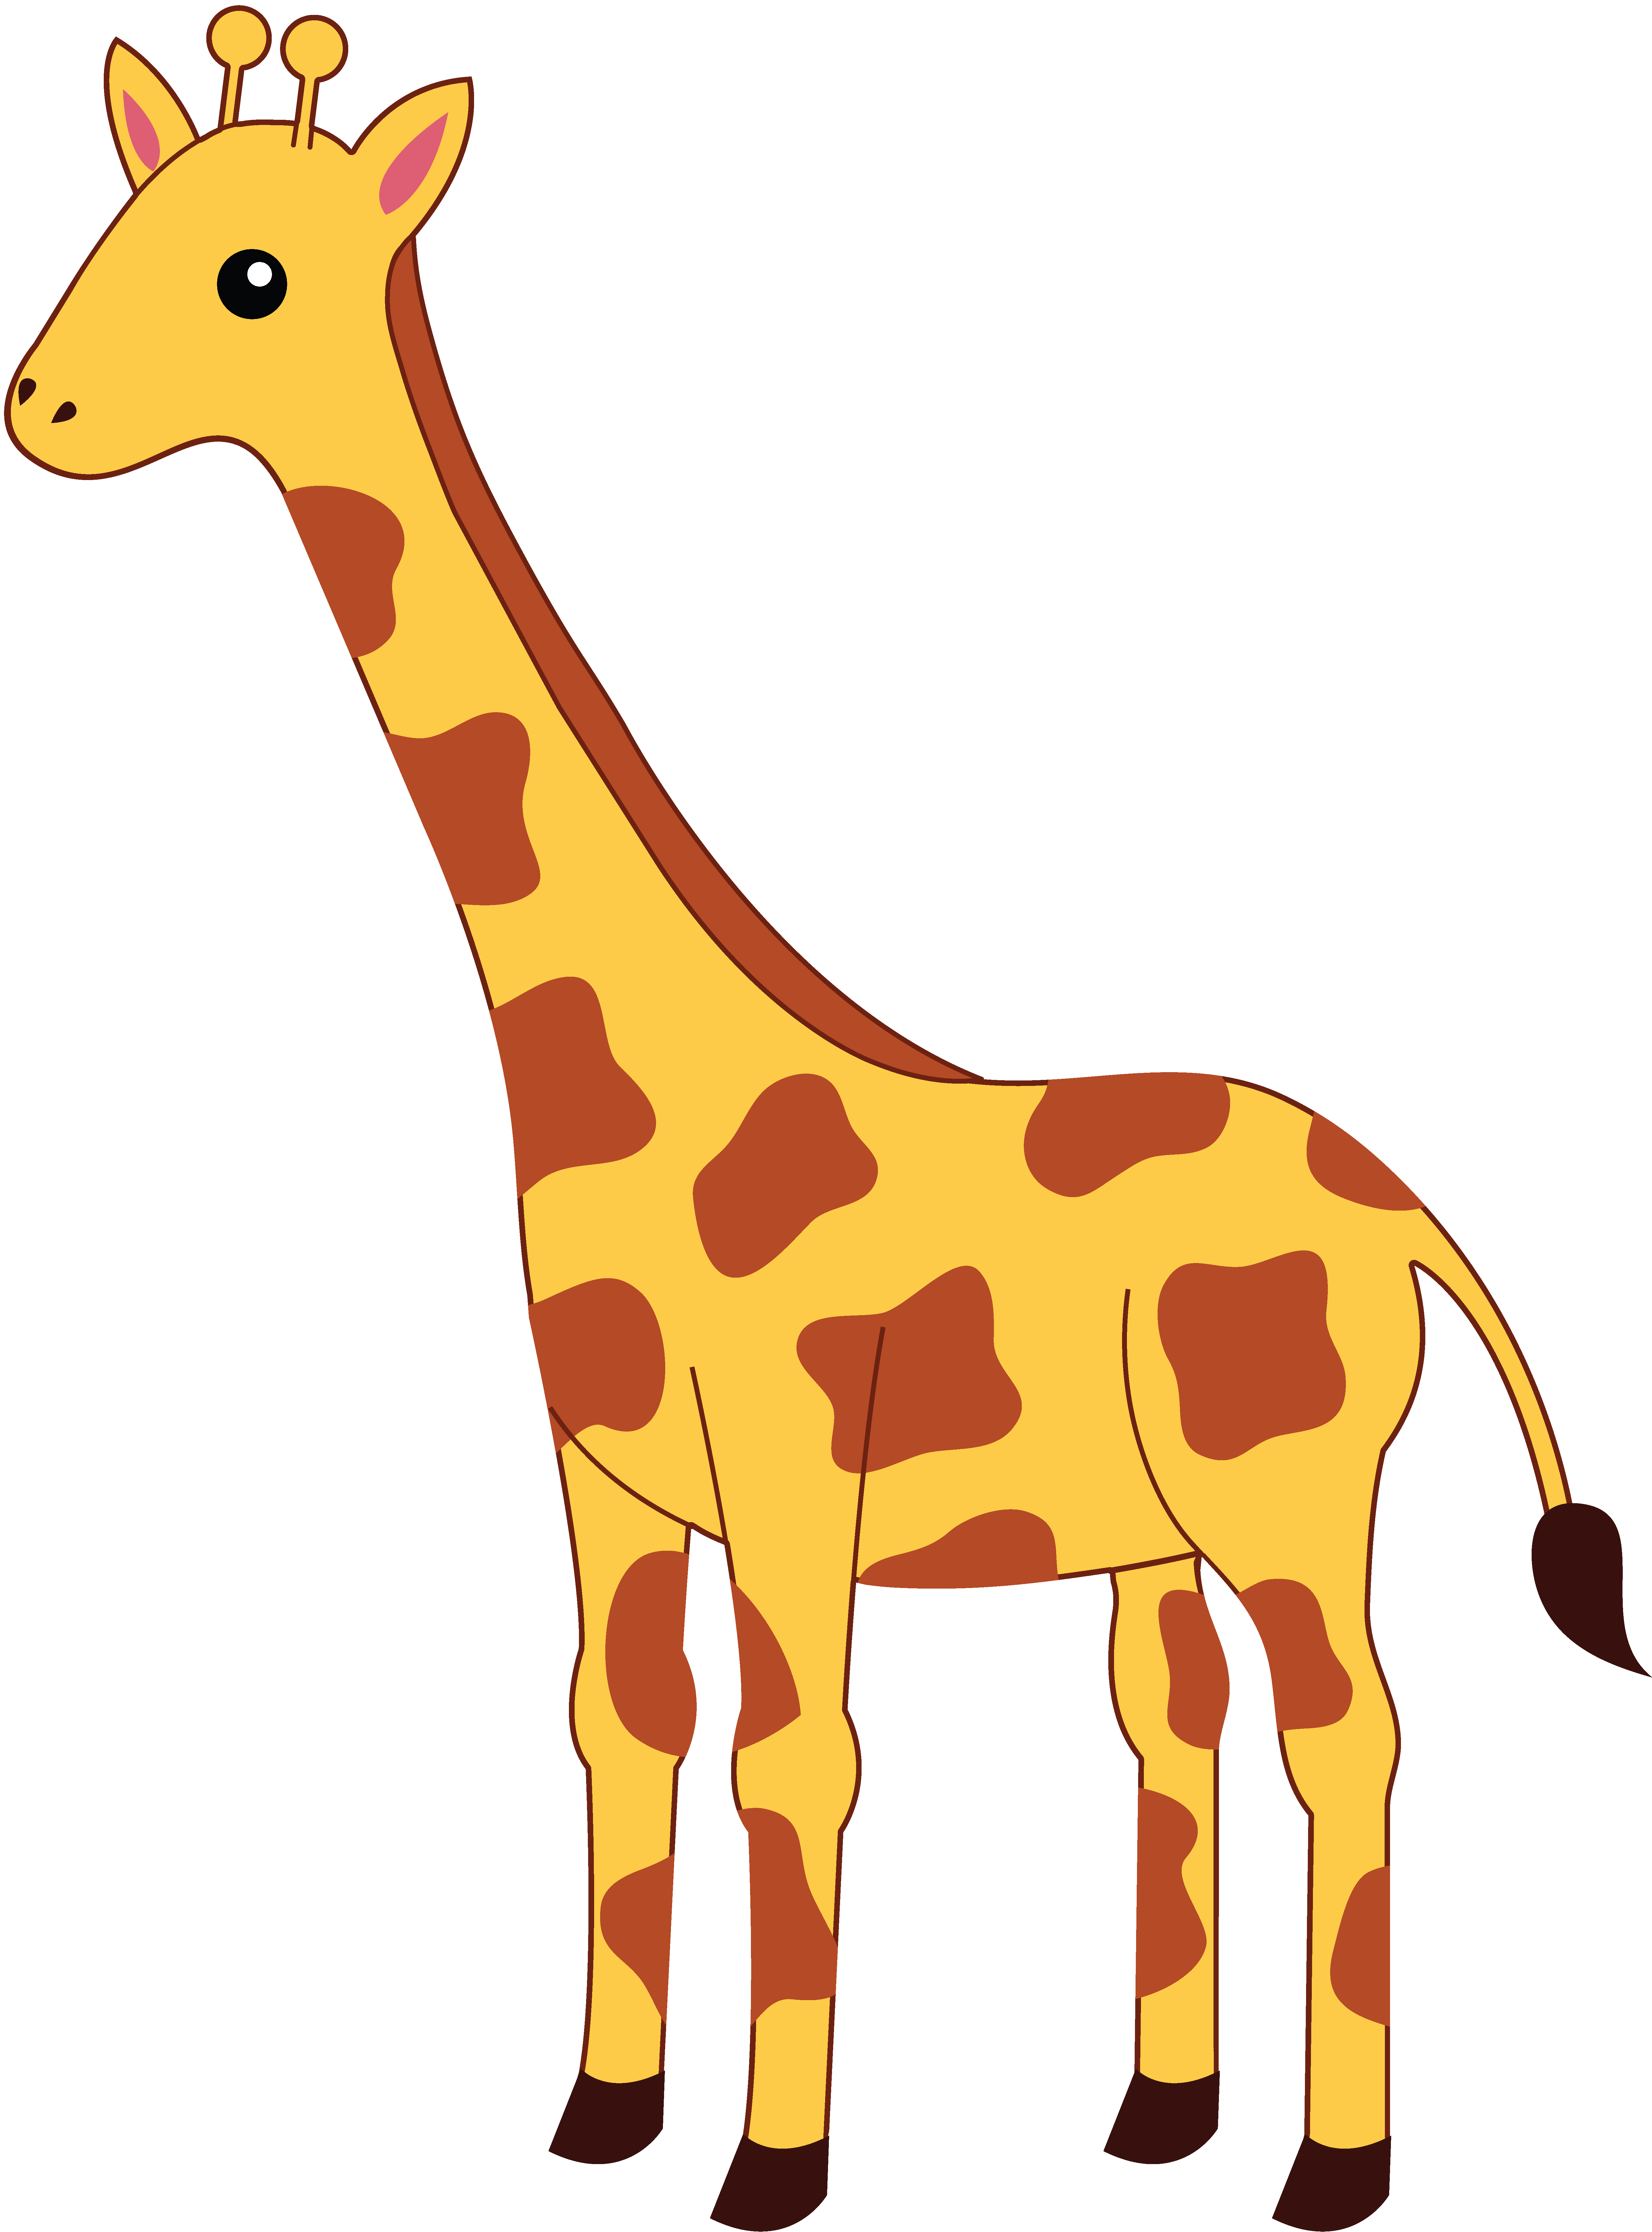 Images For > Baby Giraffe Cartoon Images